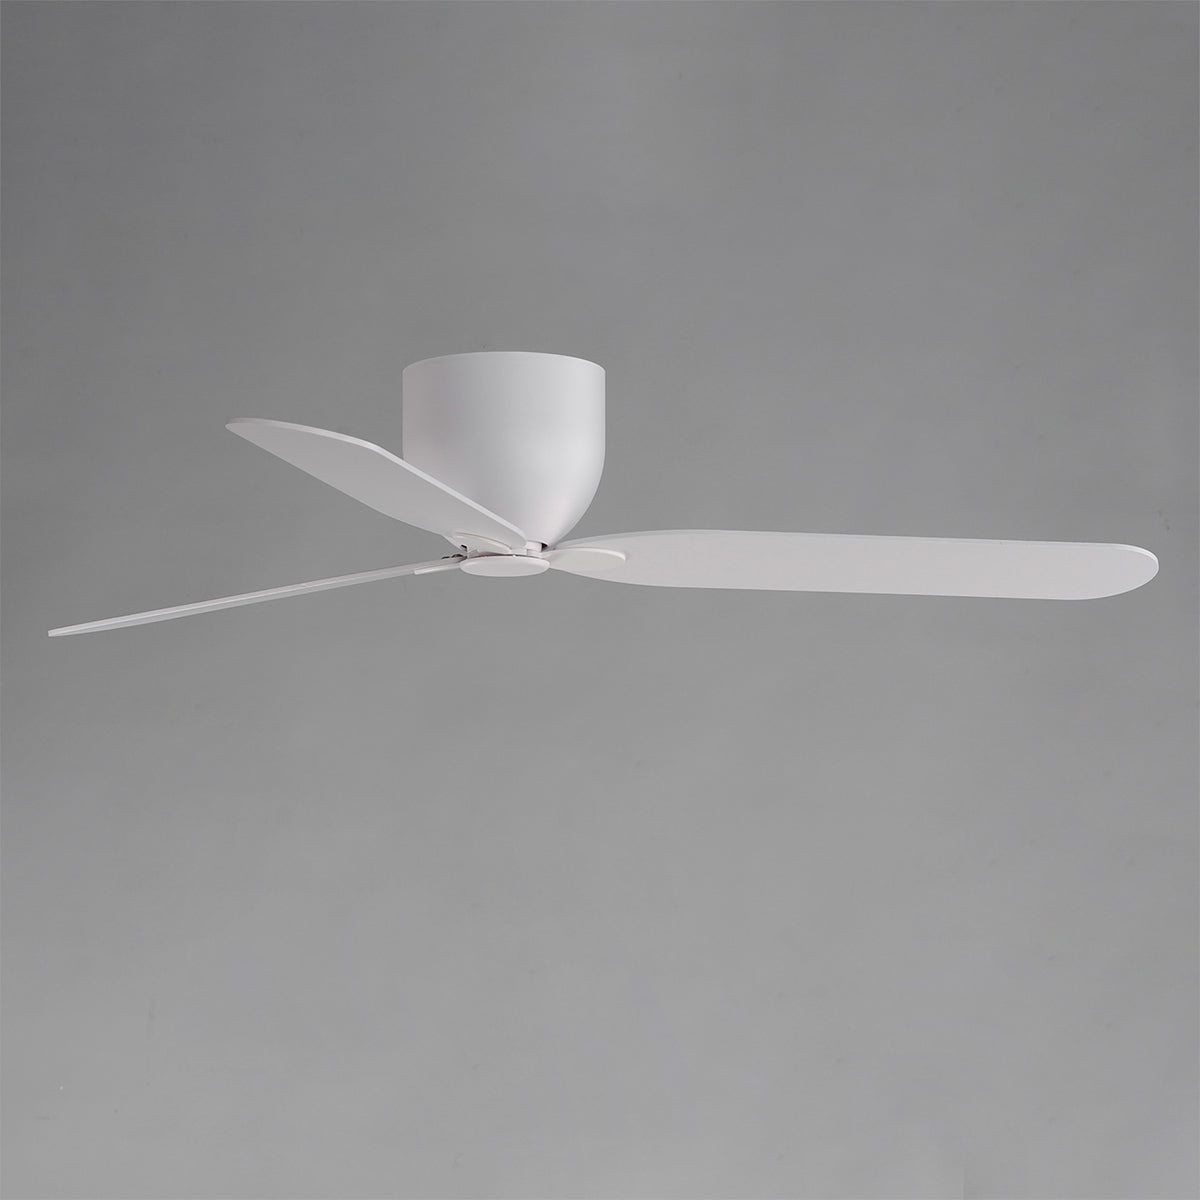 Lowell 52 Inch 3-Blade Hugger Ceiling Fan With Wall Control, Matte White Finish - Bees Lighting